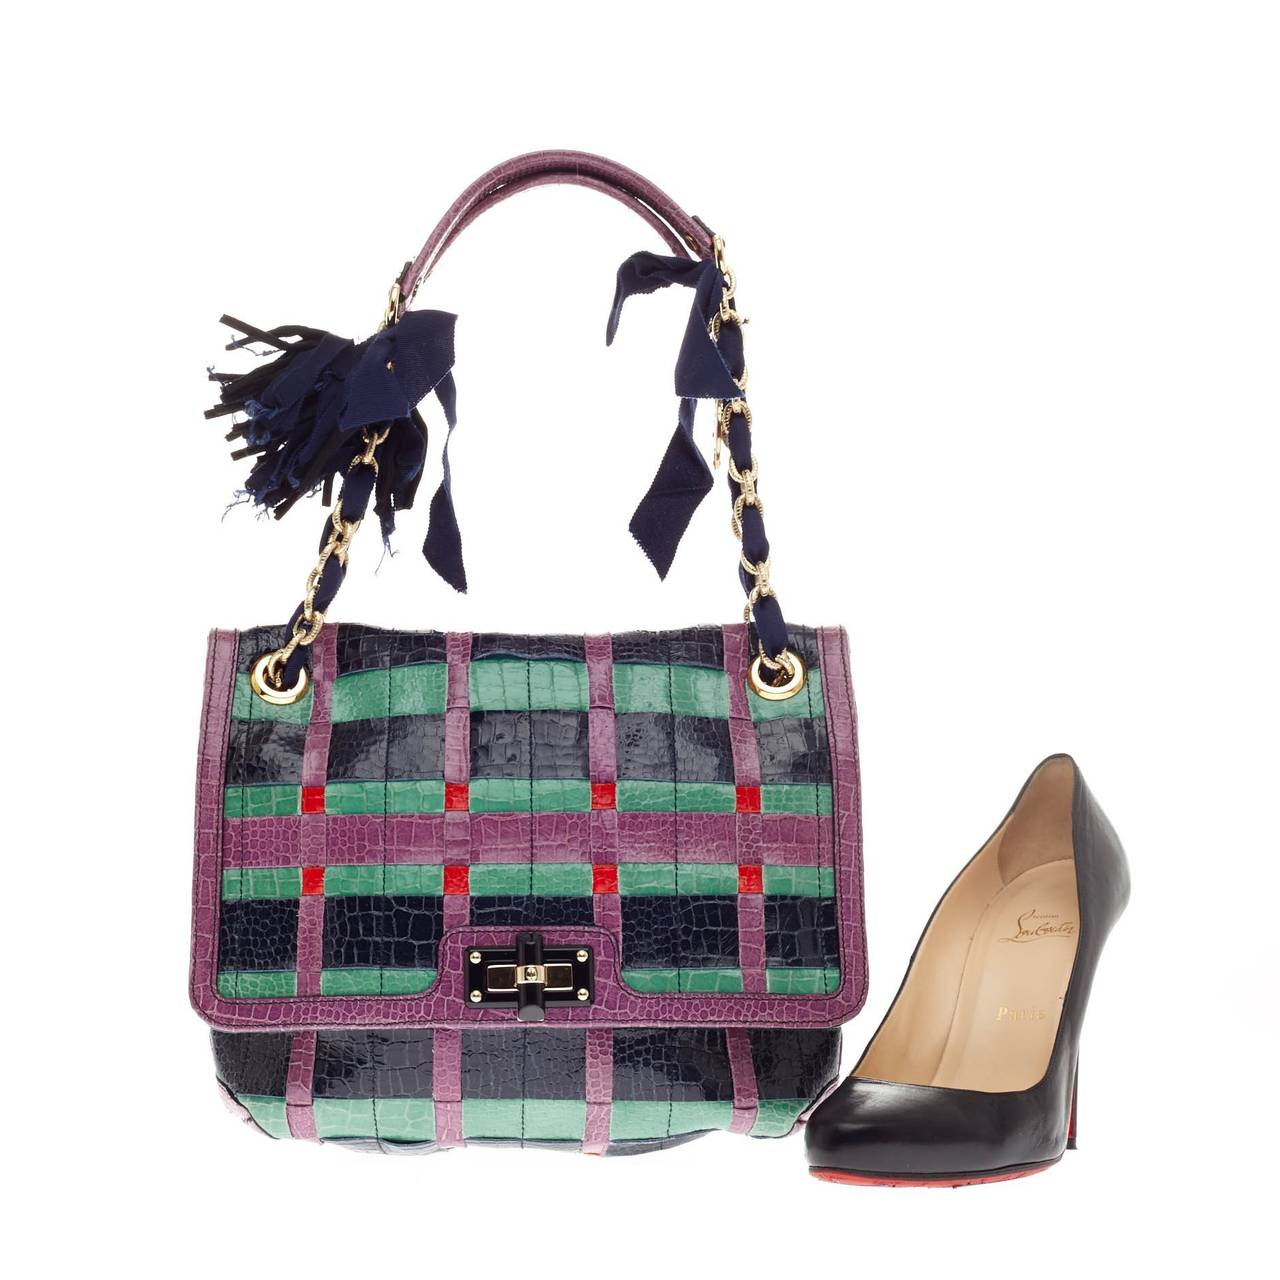 This authentic Lanvin Happy Shoulder Bag Embossed Crocodile in vibrant teal, navy blue, red and purple embossed crocodile leather showcases a funky and playful plaid design. This fold-over flap shoulder bag features a resin turn-lock closure and